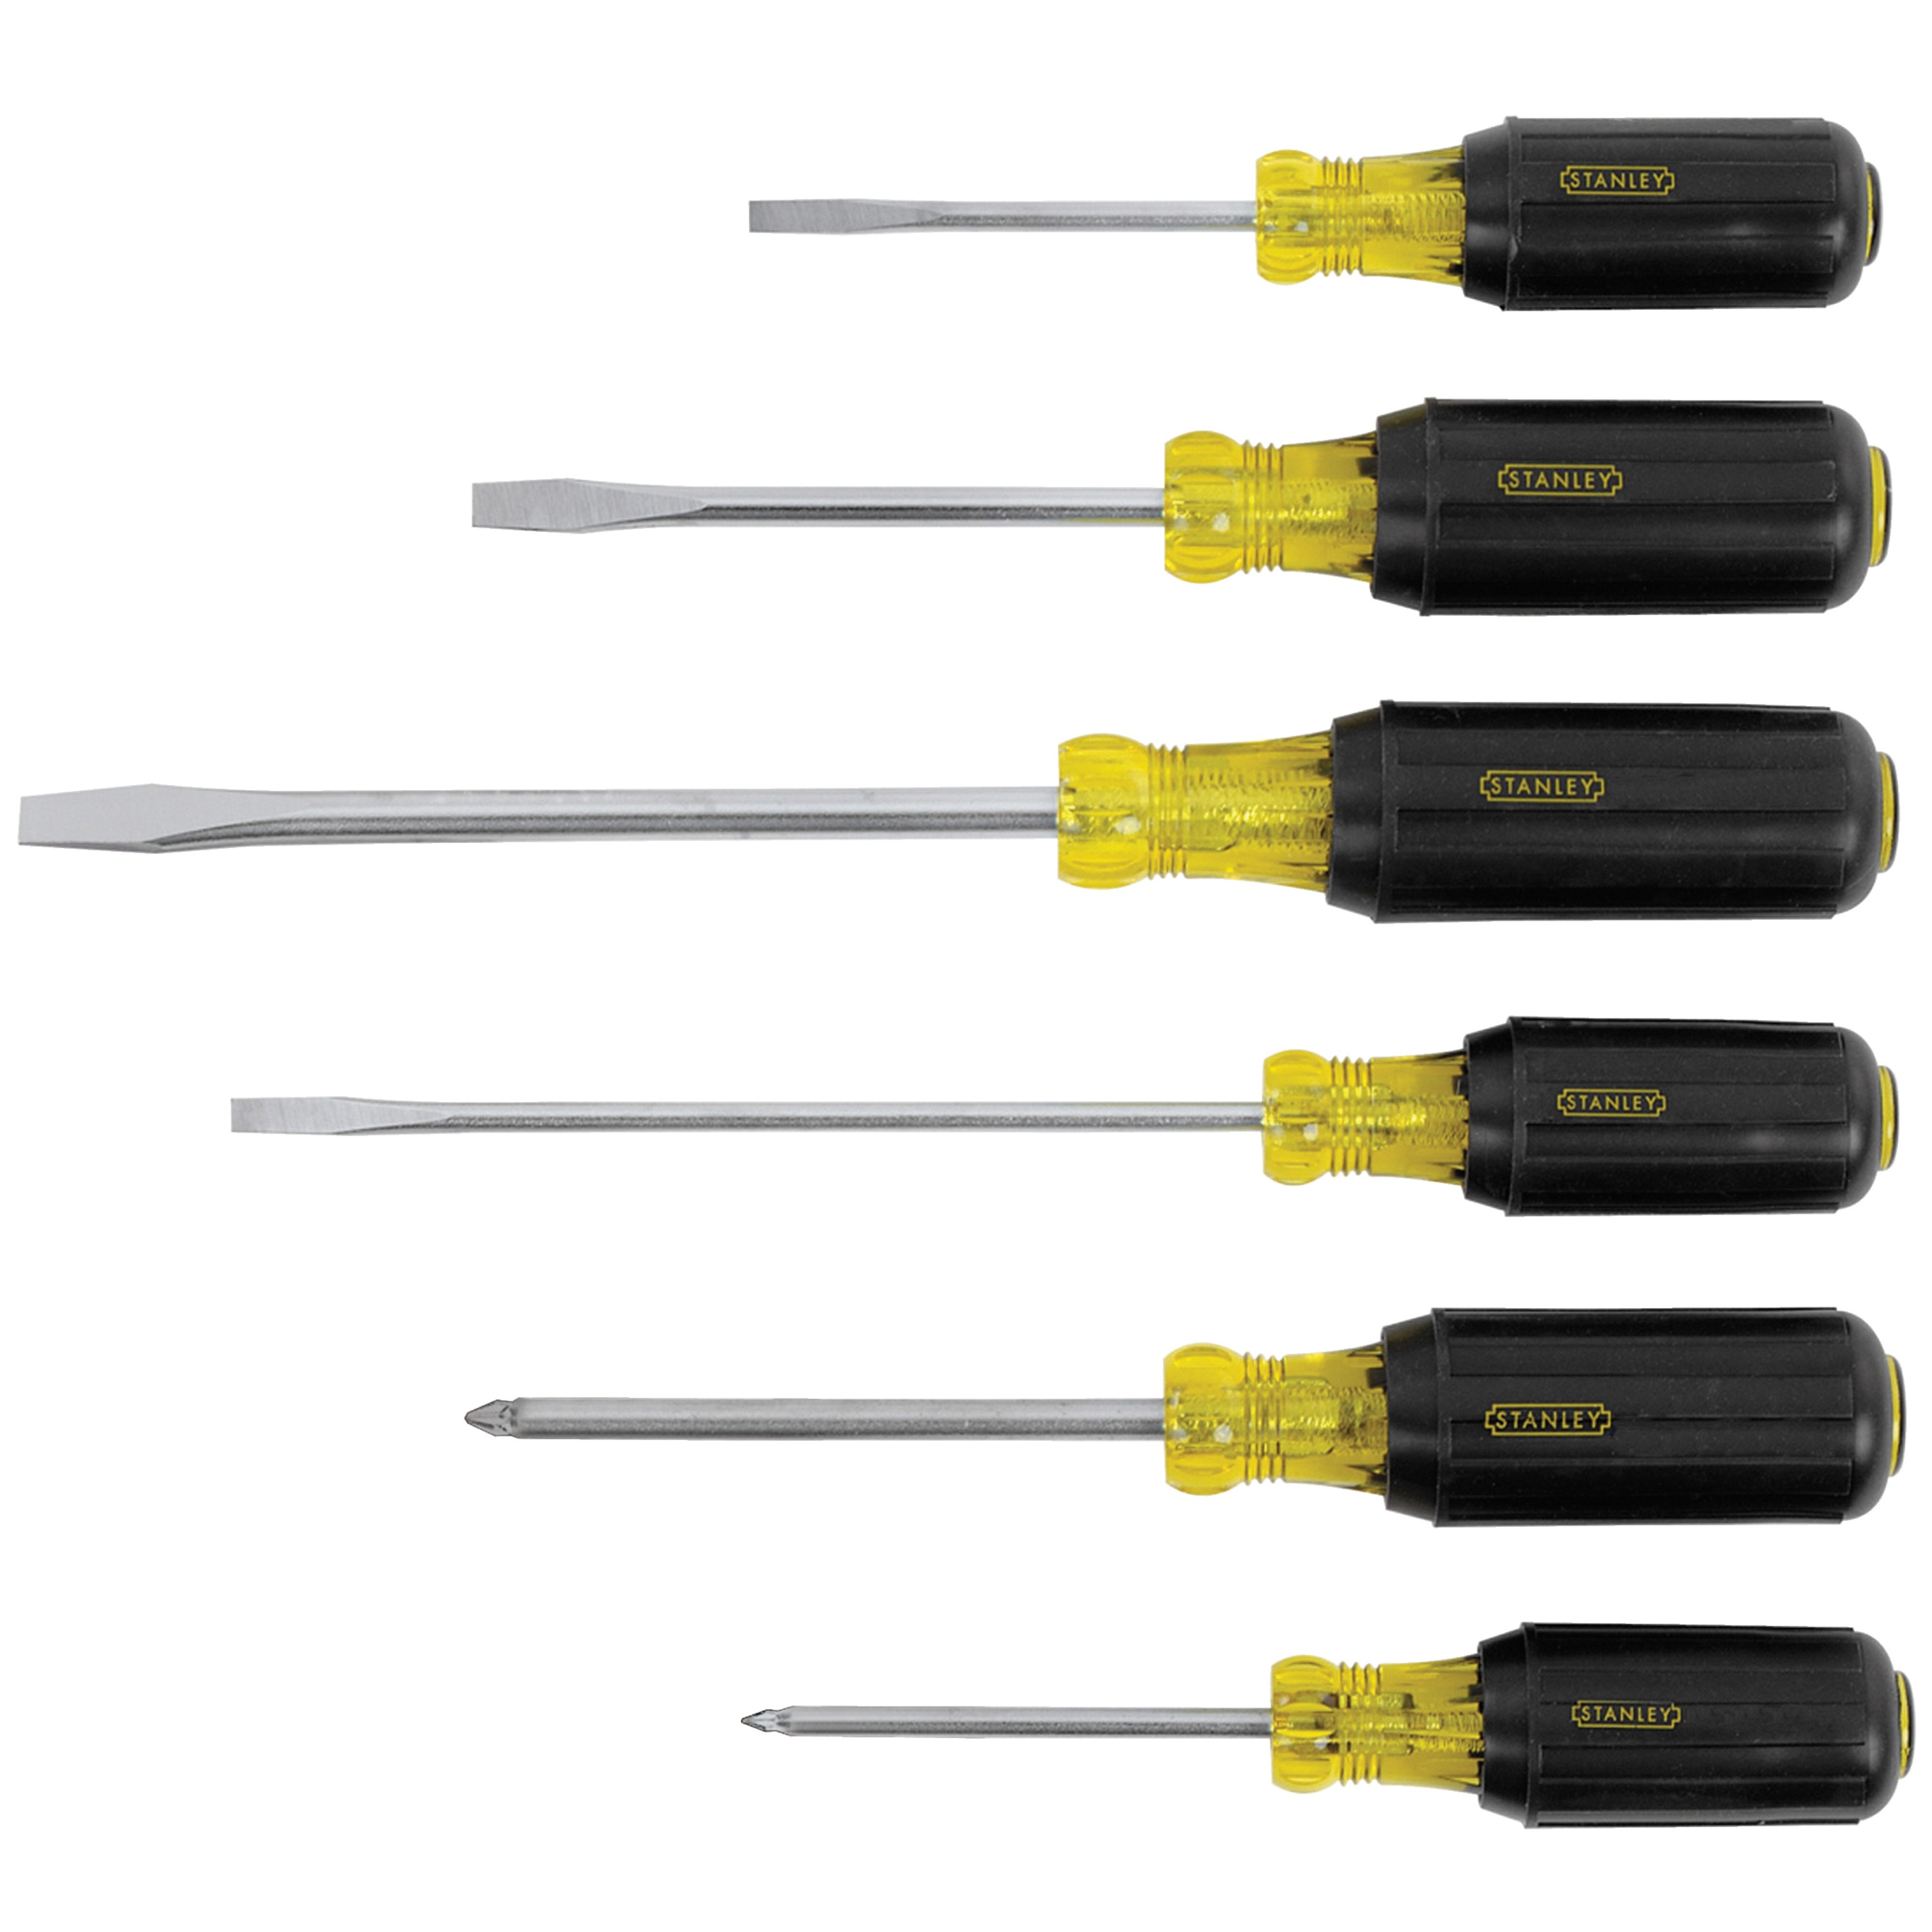 Set of Project Partners 4 Piece Precision Screwdriver with Comfort Grip Handle sets